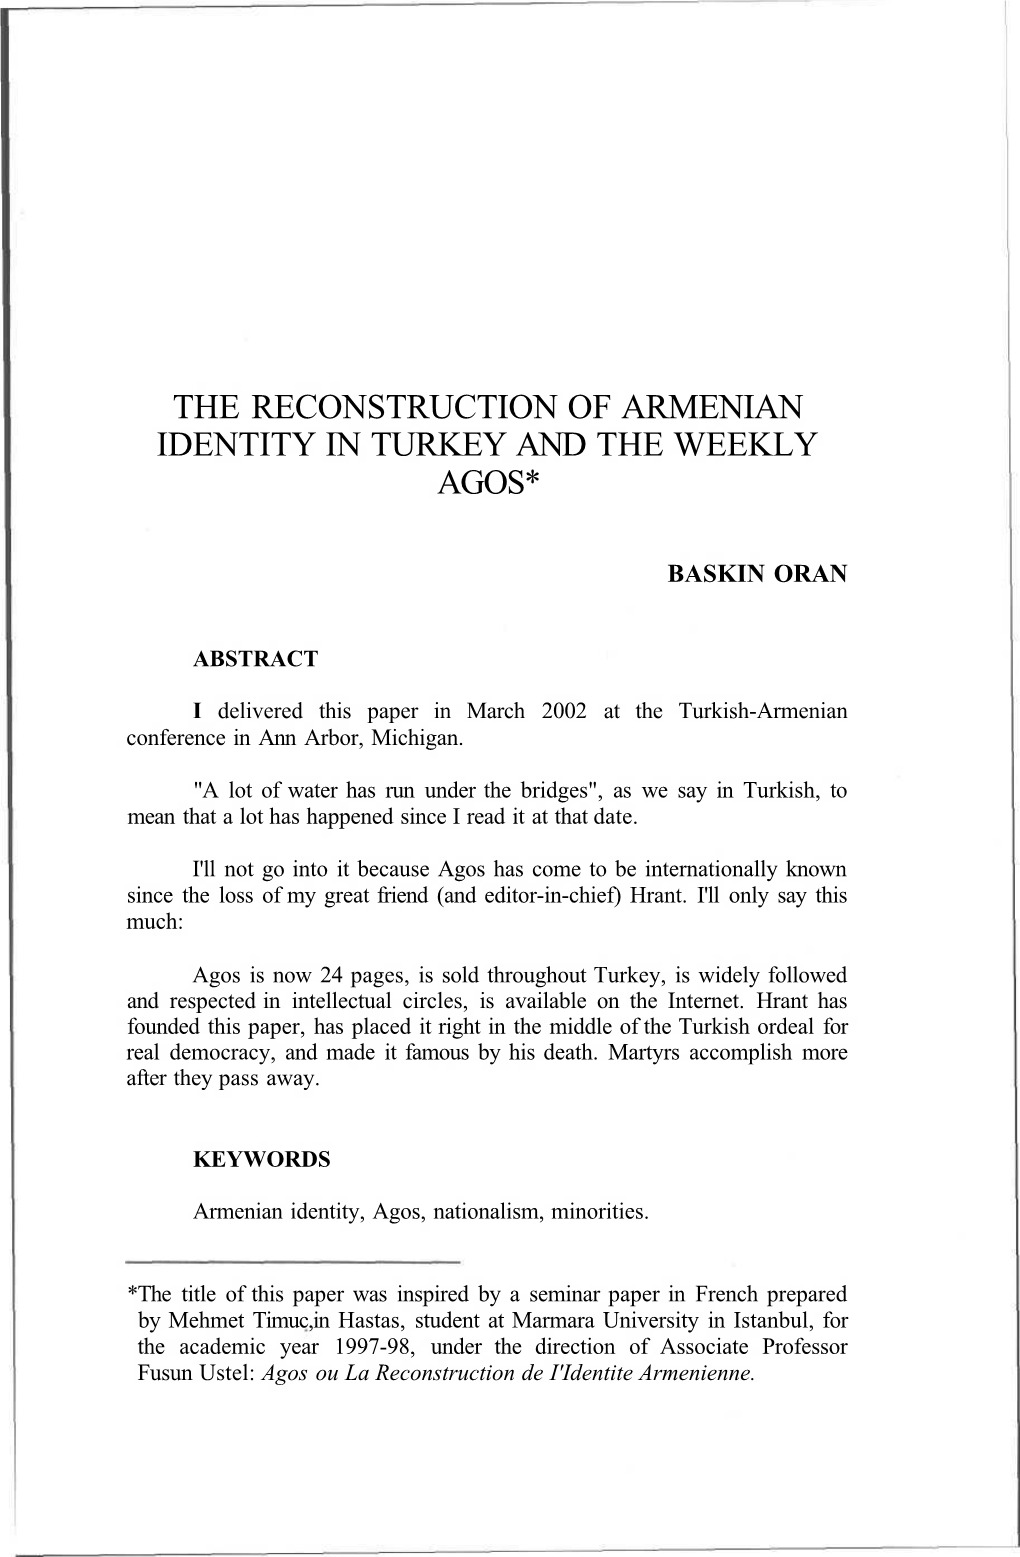 The Reconstruction of Armenian Identity in Turkey and the Weekly Agos*